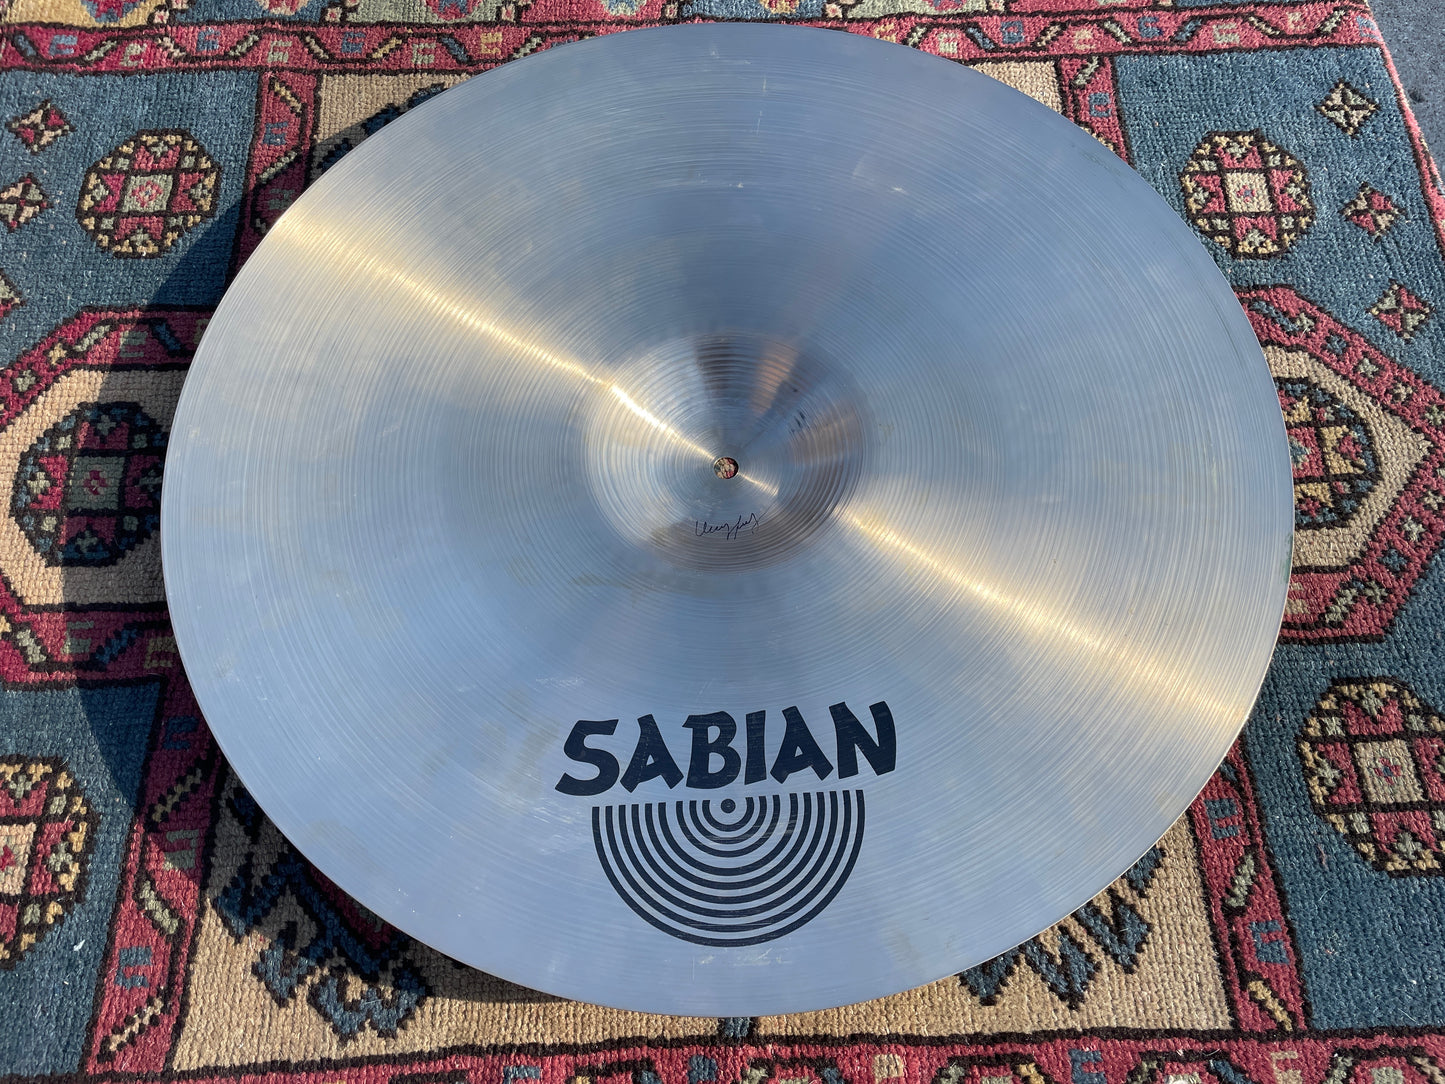 21" Sabian Hand Hammered HH Vintage Ride Cymbal 2258g